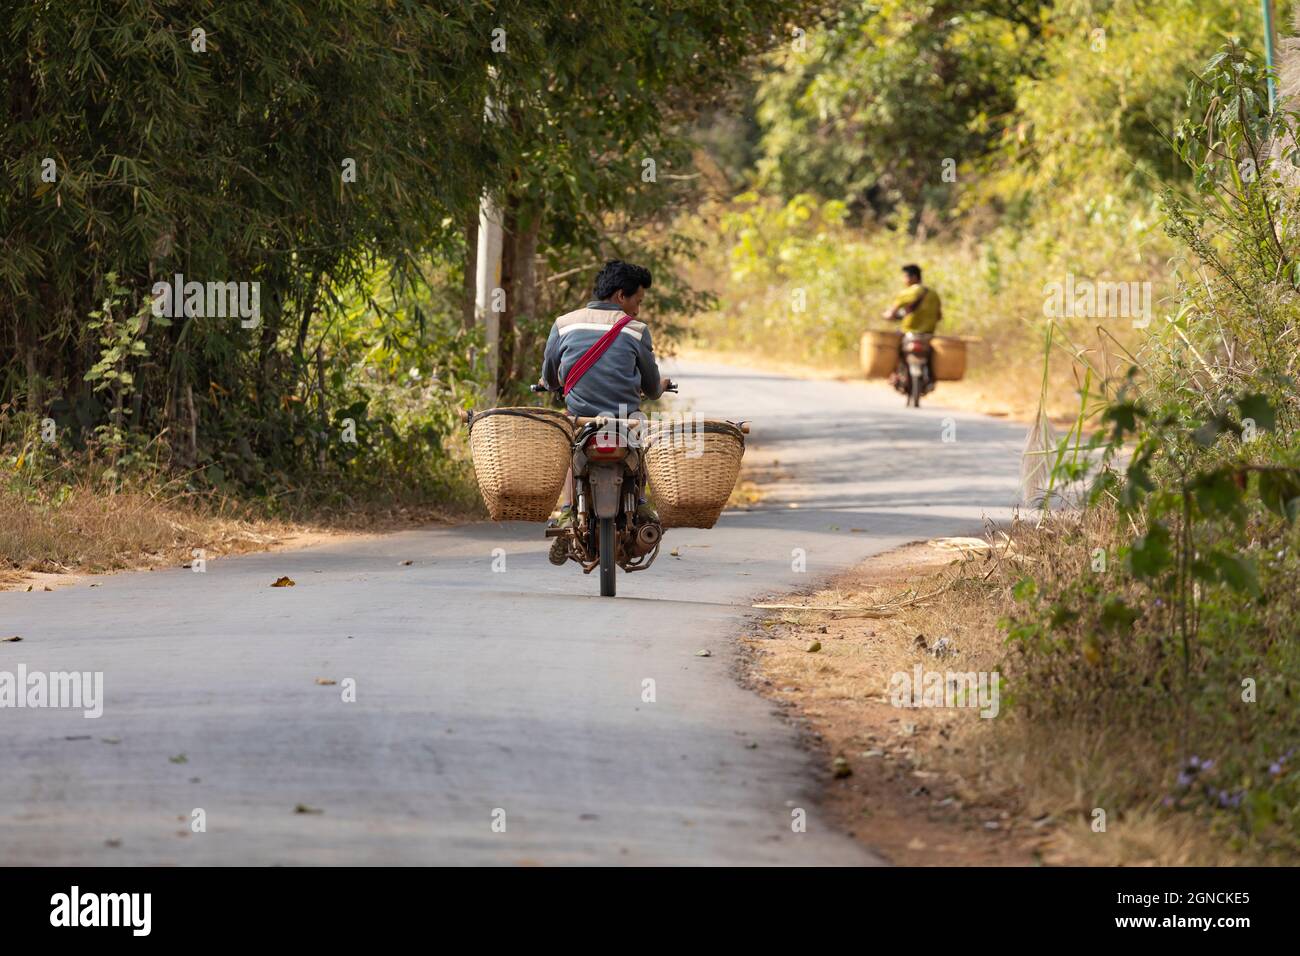 Shan State, Myanmar - Jan 05, 2020: A man drives quietly with his old motorbike, down the West corridor road near Inle Lake Stock Photo